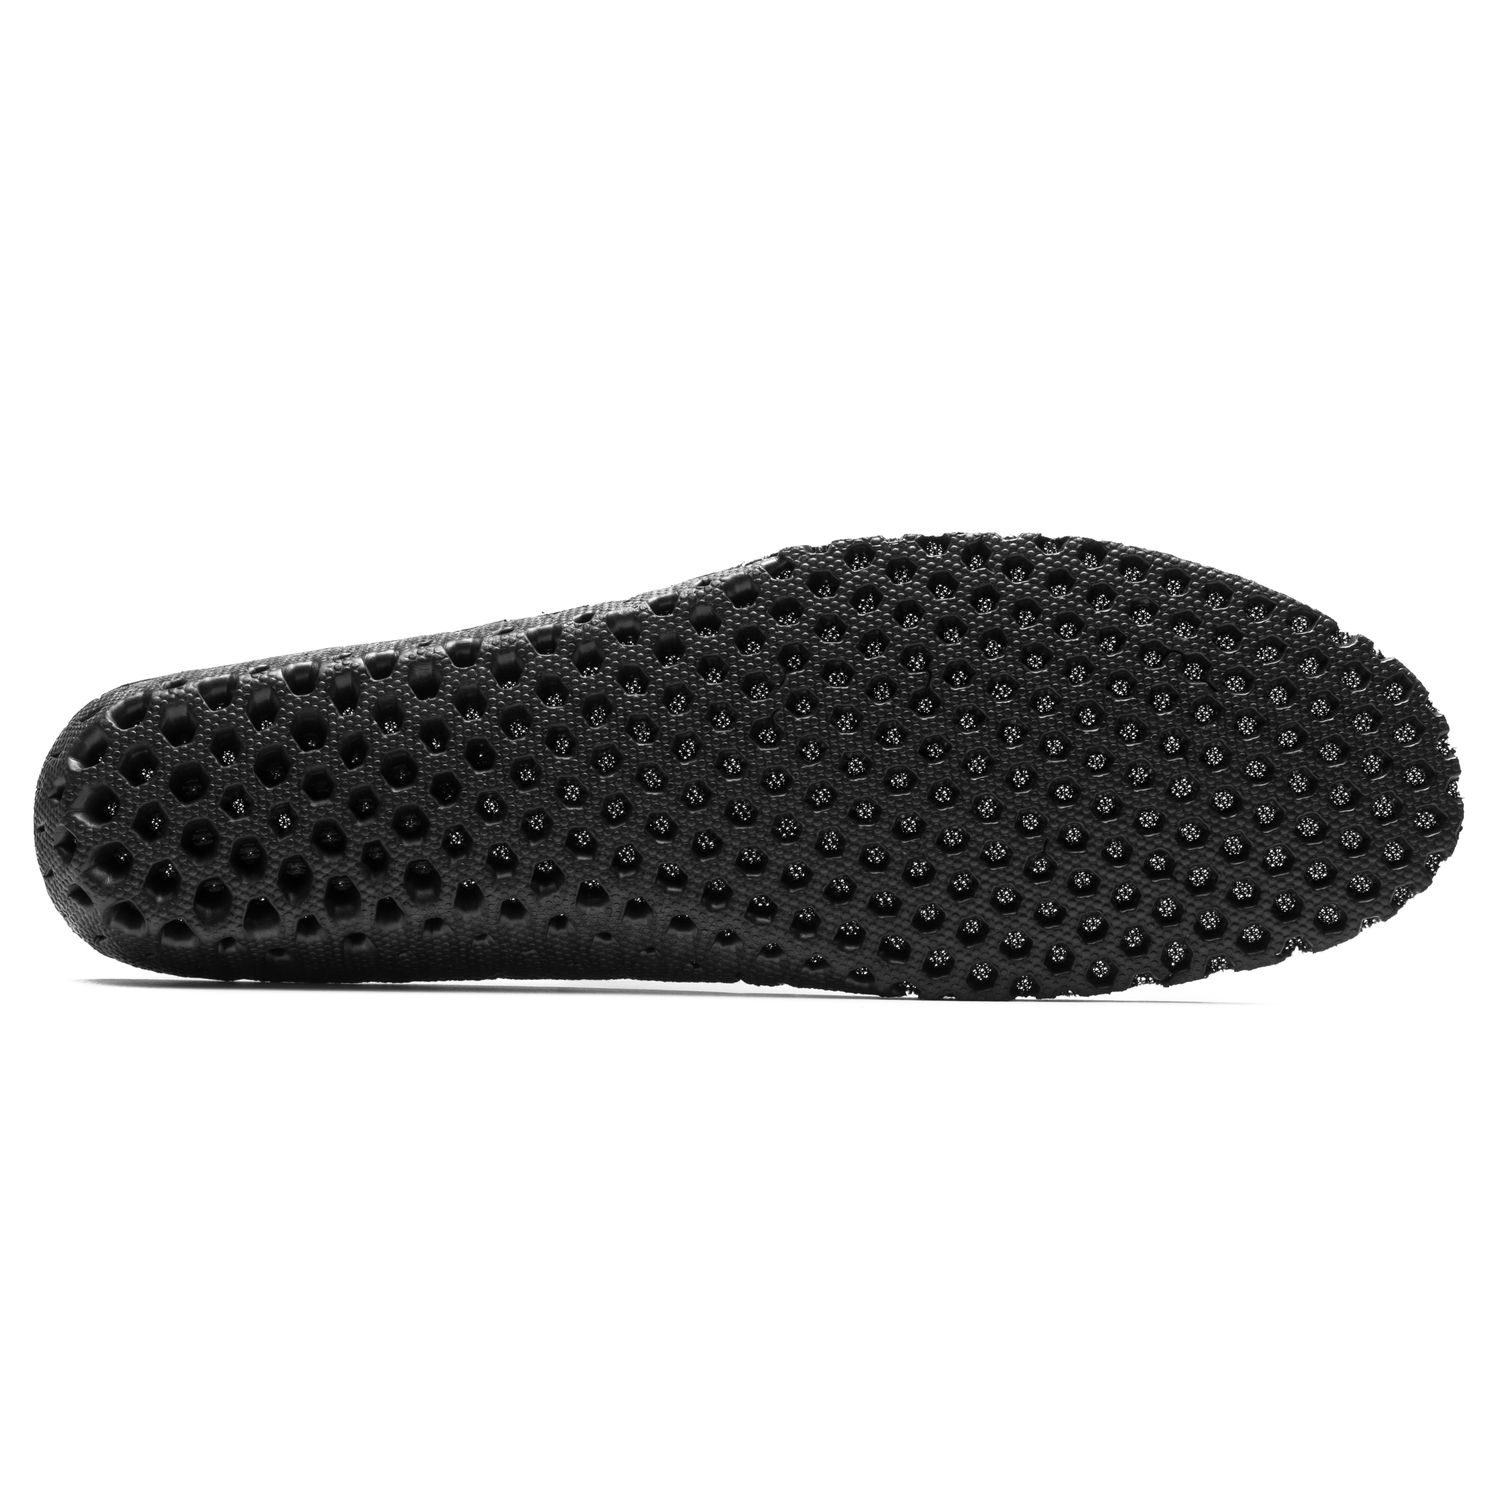 Five-pack Rumpf PERFORMANCE shoe insole 510-5